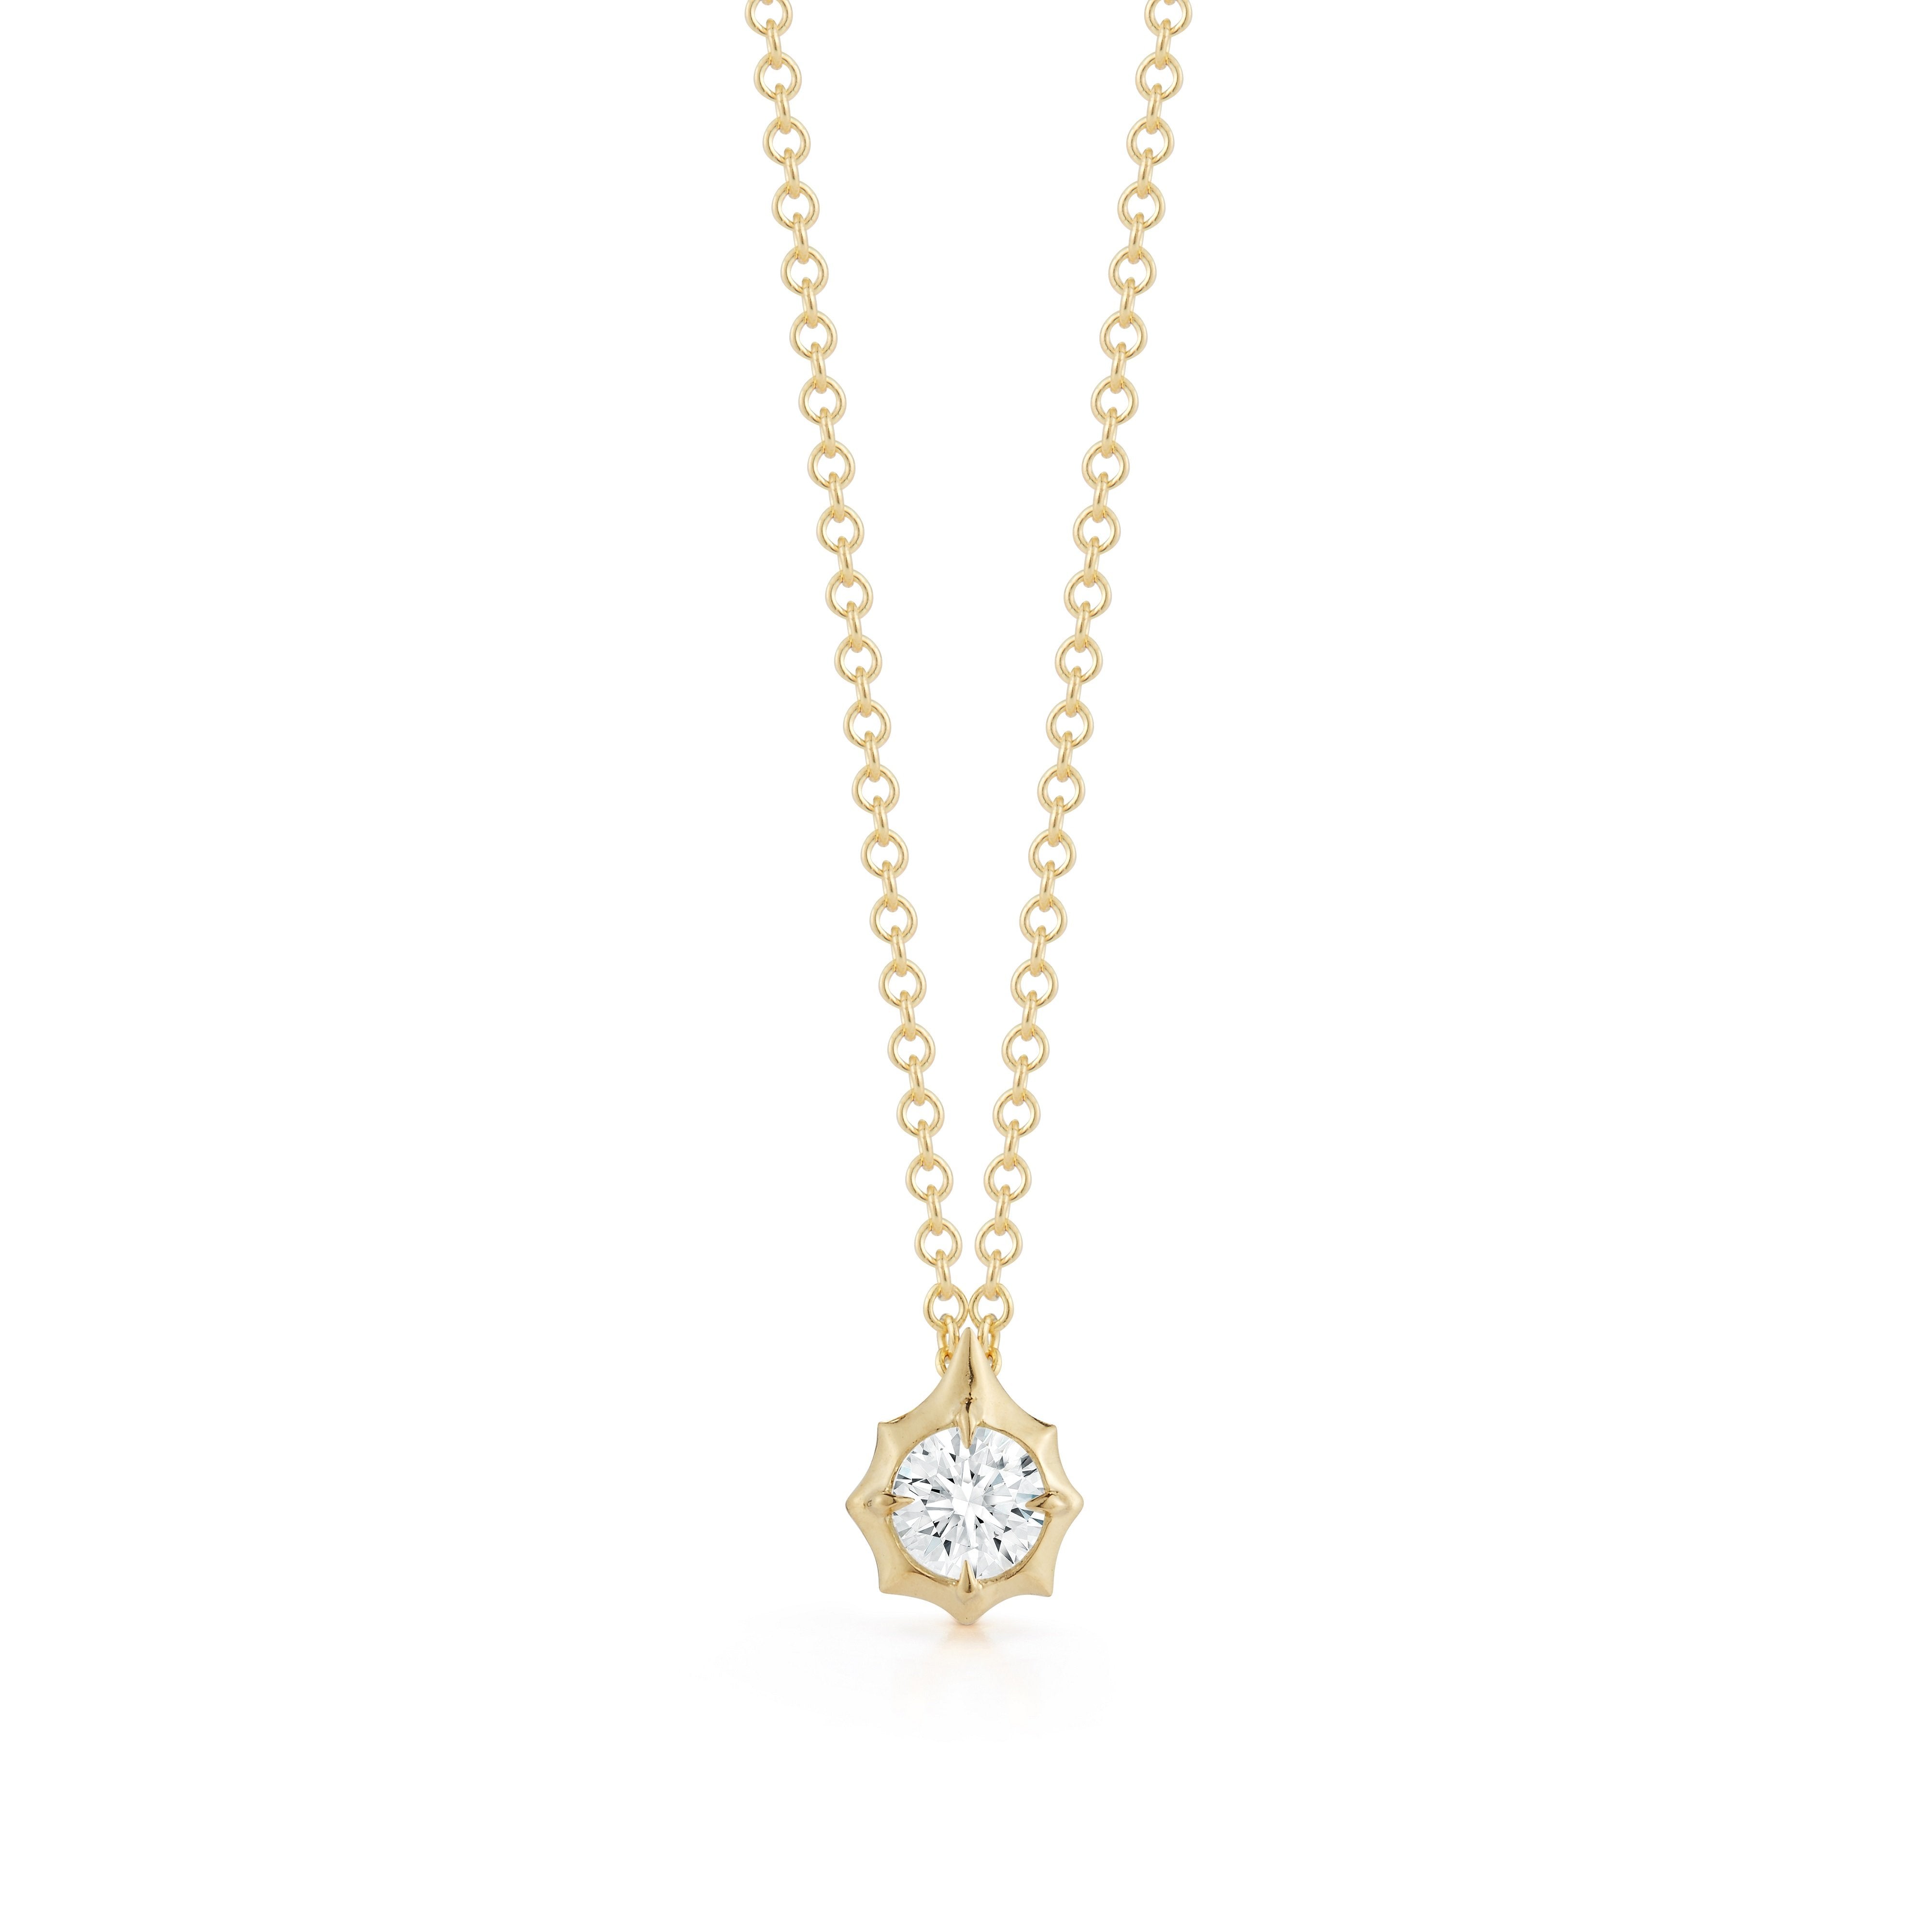 Sophisticate Pendant in 18K Yellow Gold